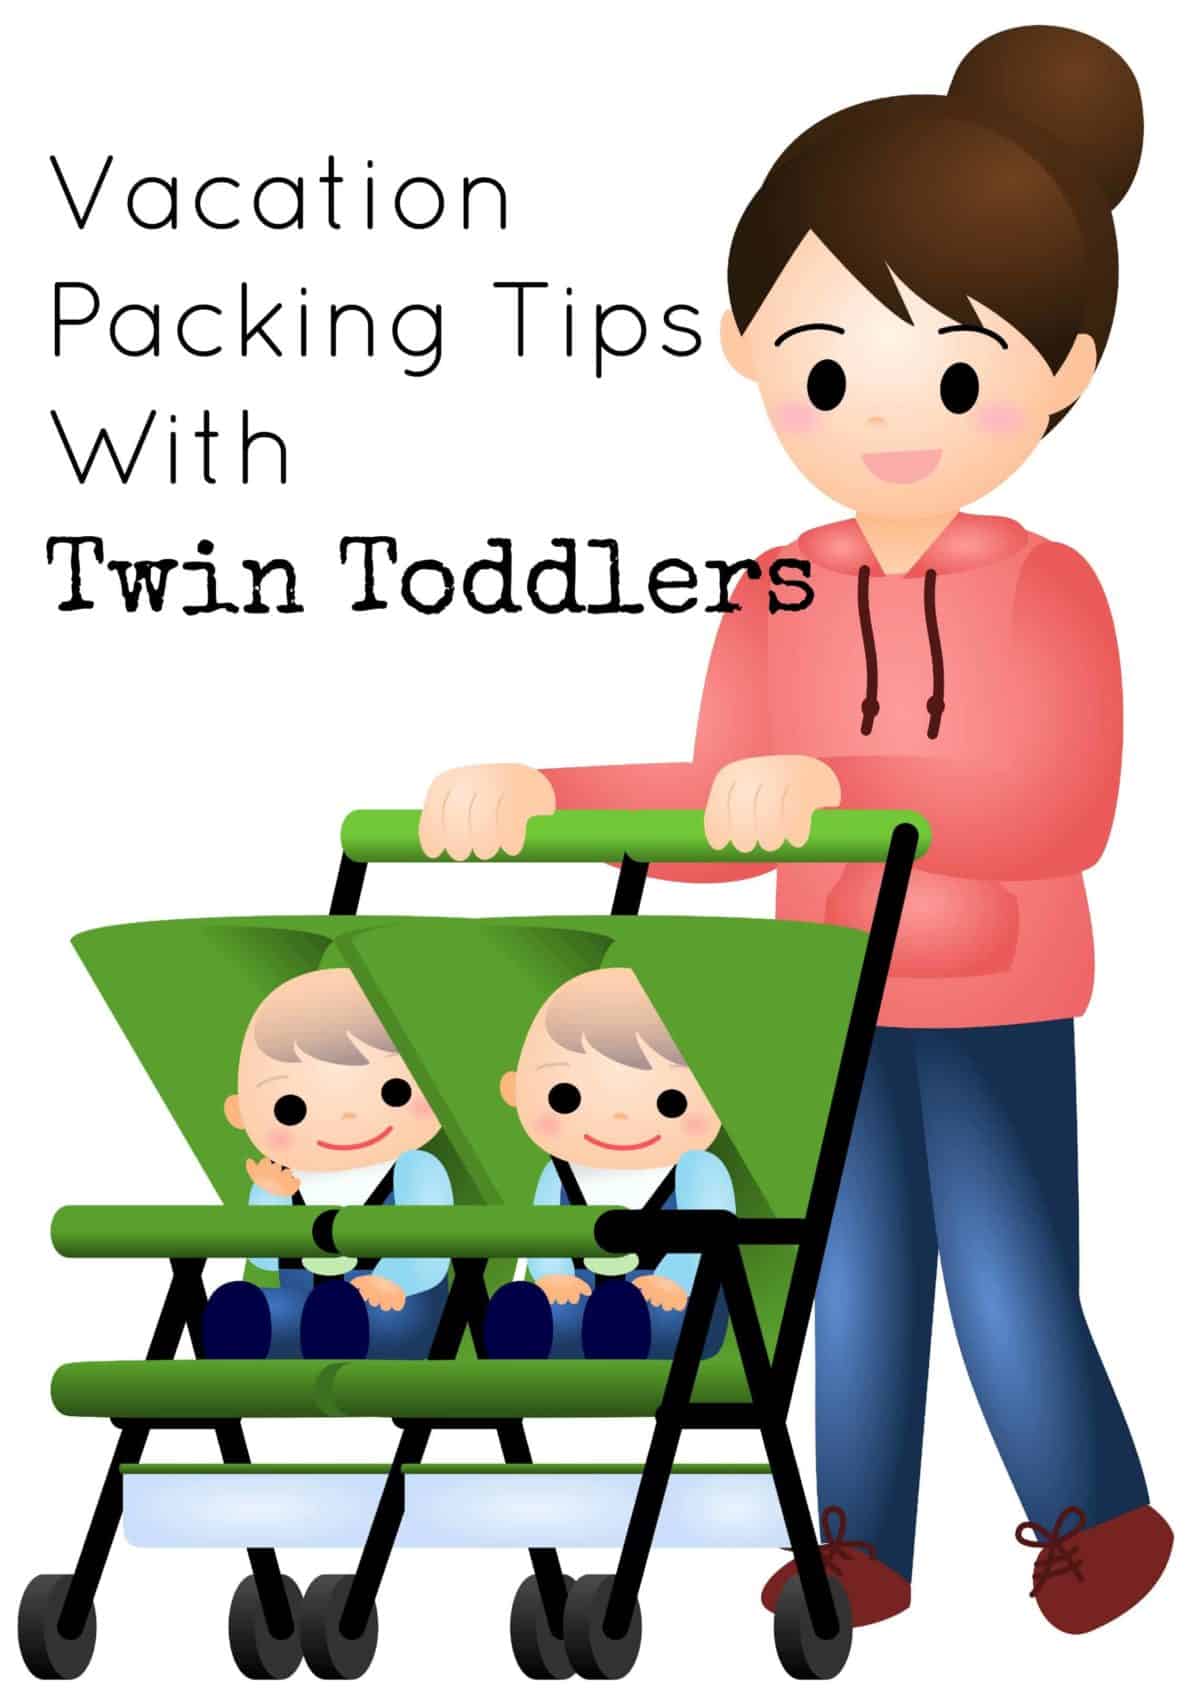 Planning a family vacation with little ones? Check out our vacation packing tips for travel with toddlers to make your family travel much easier!